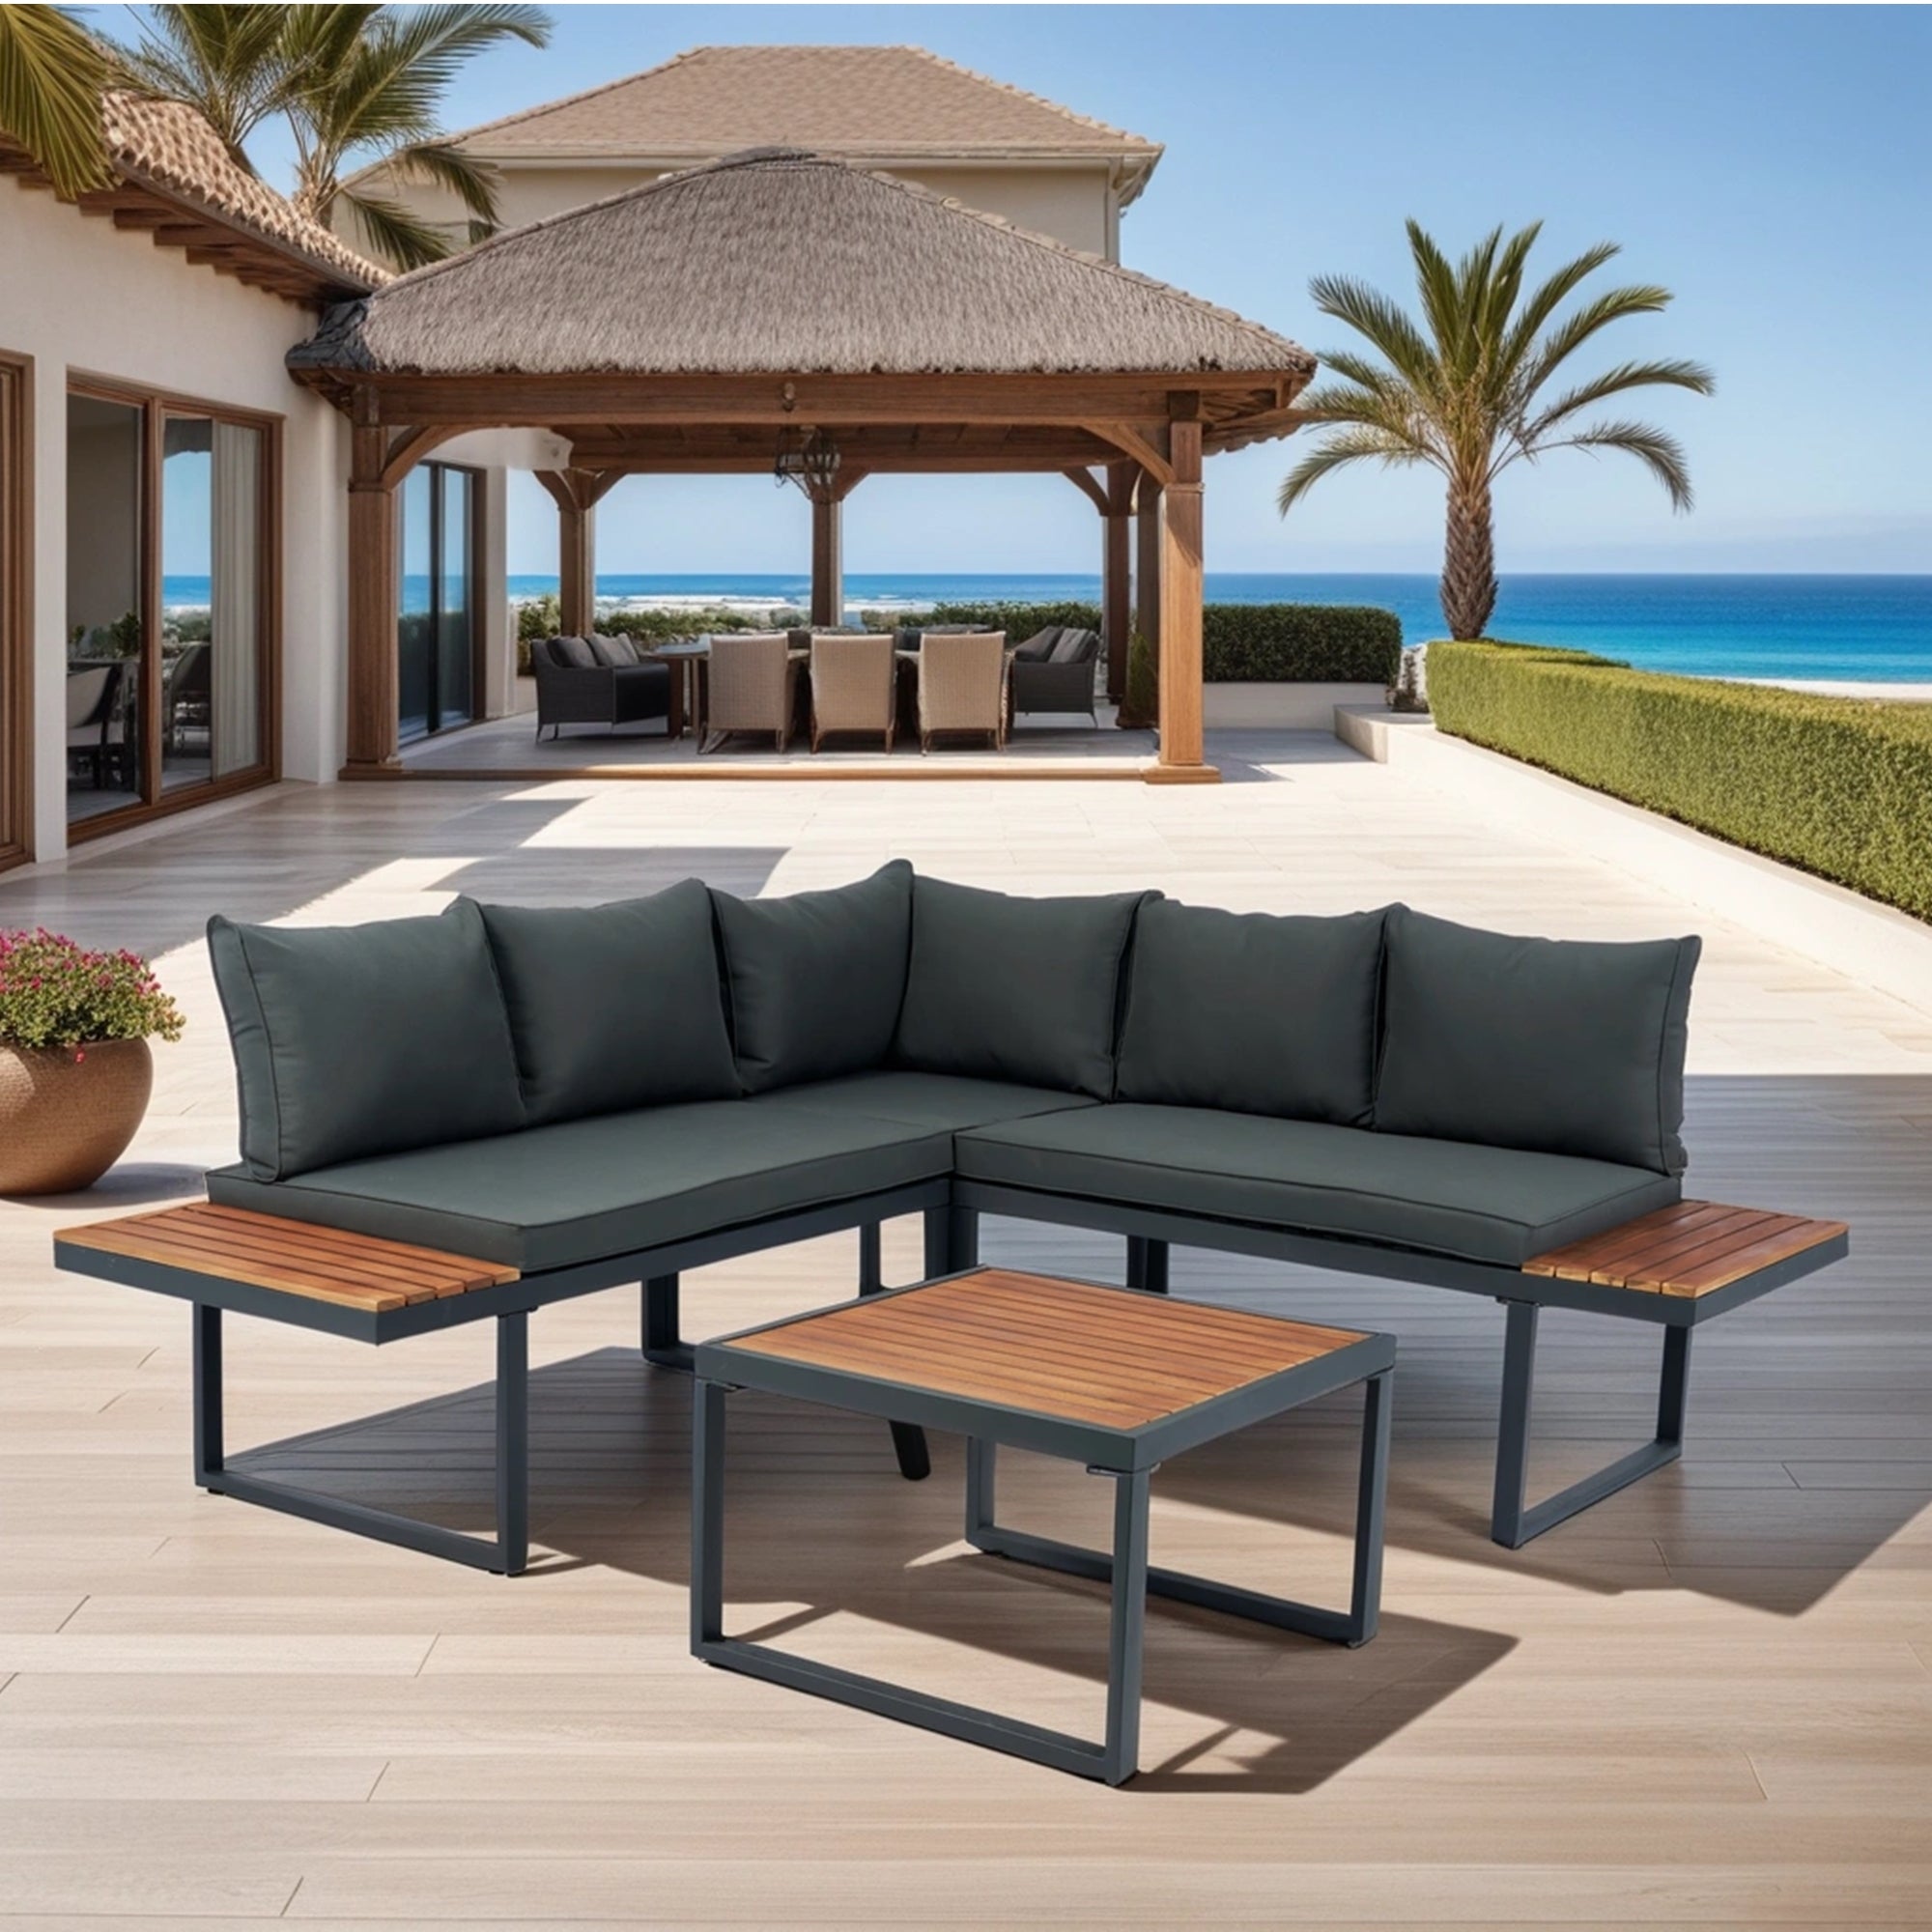 4 Piece L Shaped Patio Wicker Outdoor 5 Seater